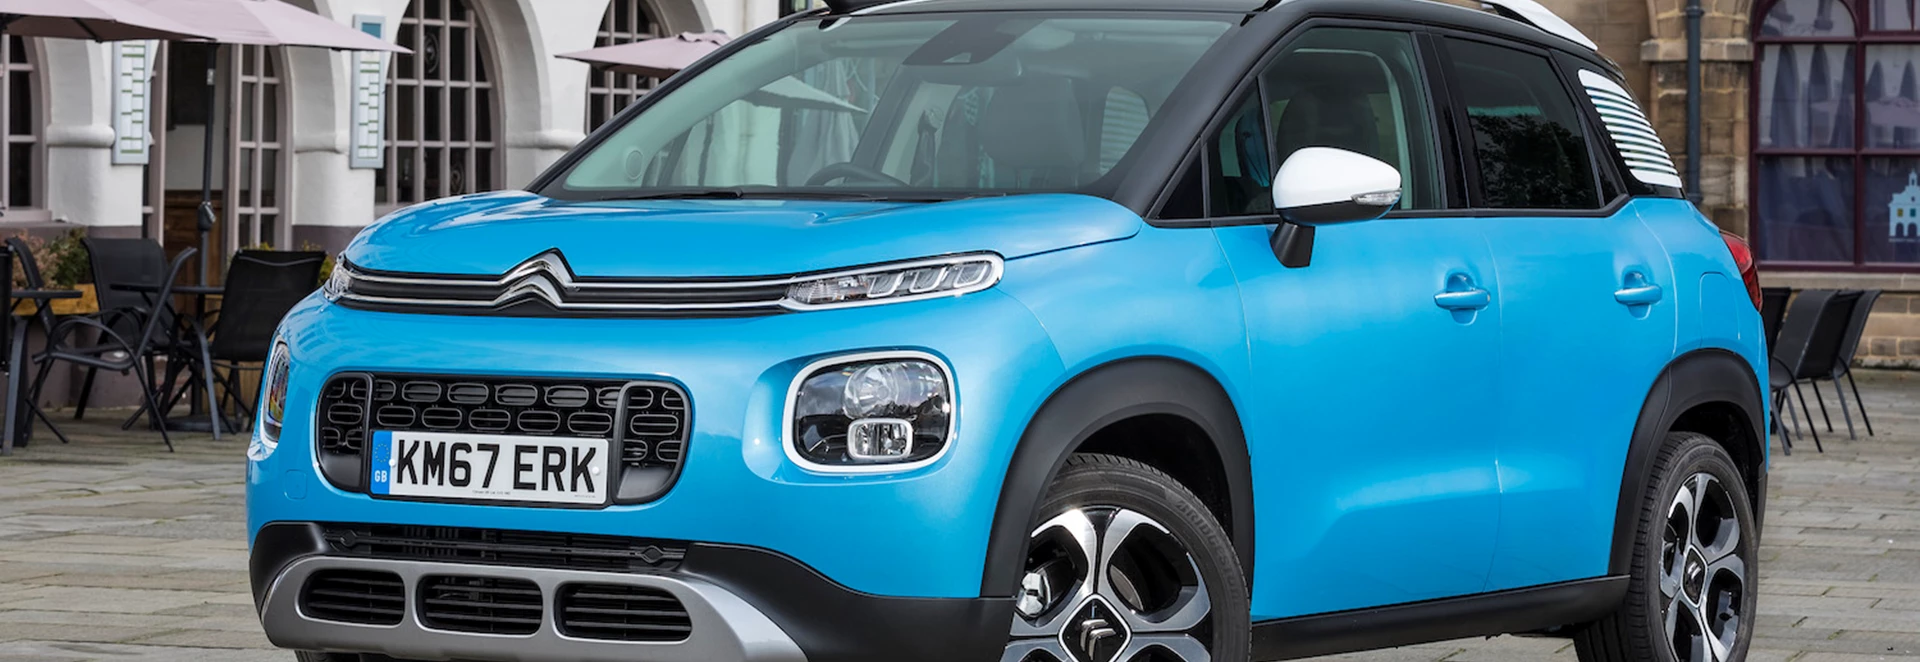 Five points why the Citroen C3 Aircross should be your next company car